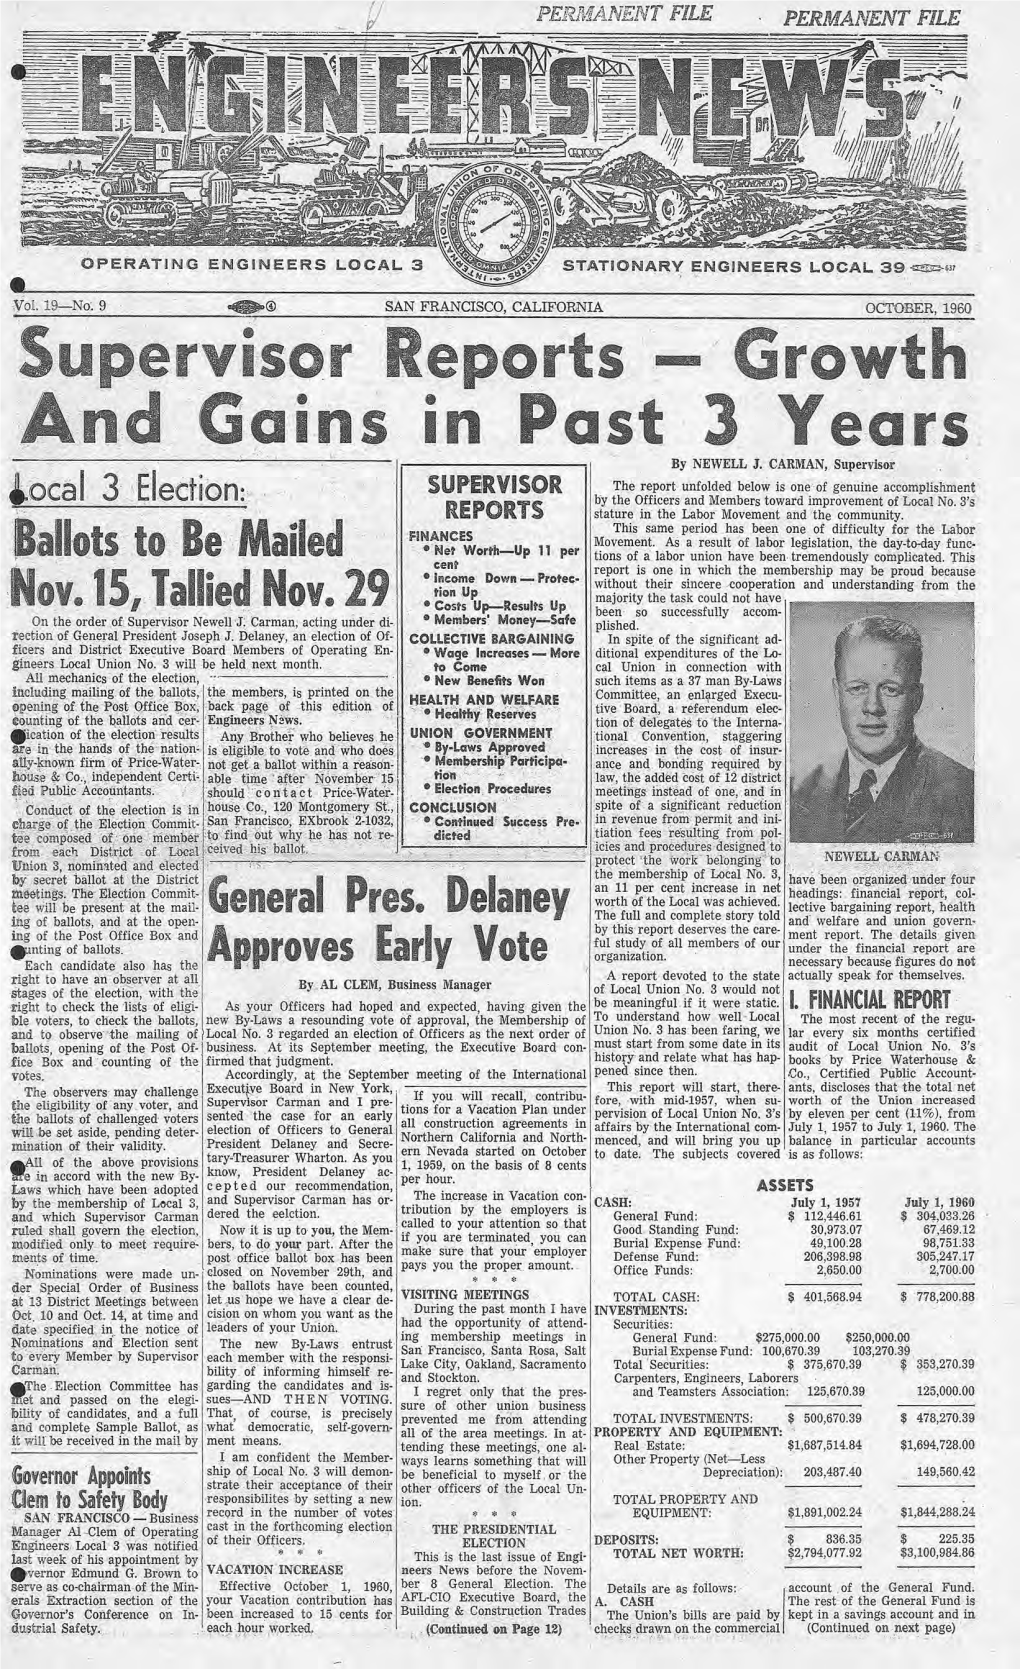 OCTOBER 1960 • • R St Rs (Conthiued Fi.·Om Page 1) Some :Sources in 1959 to 1960 ; Ary Increases for the Business